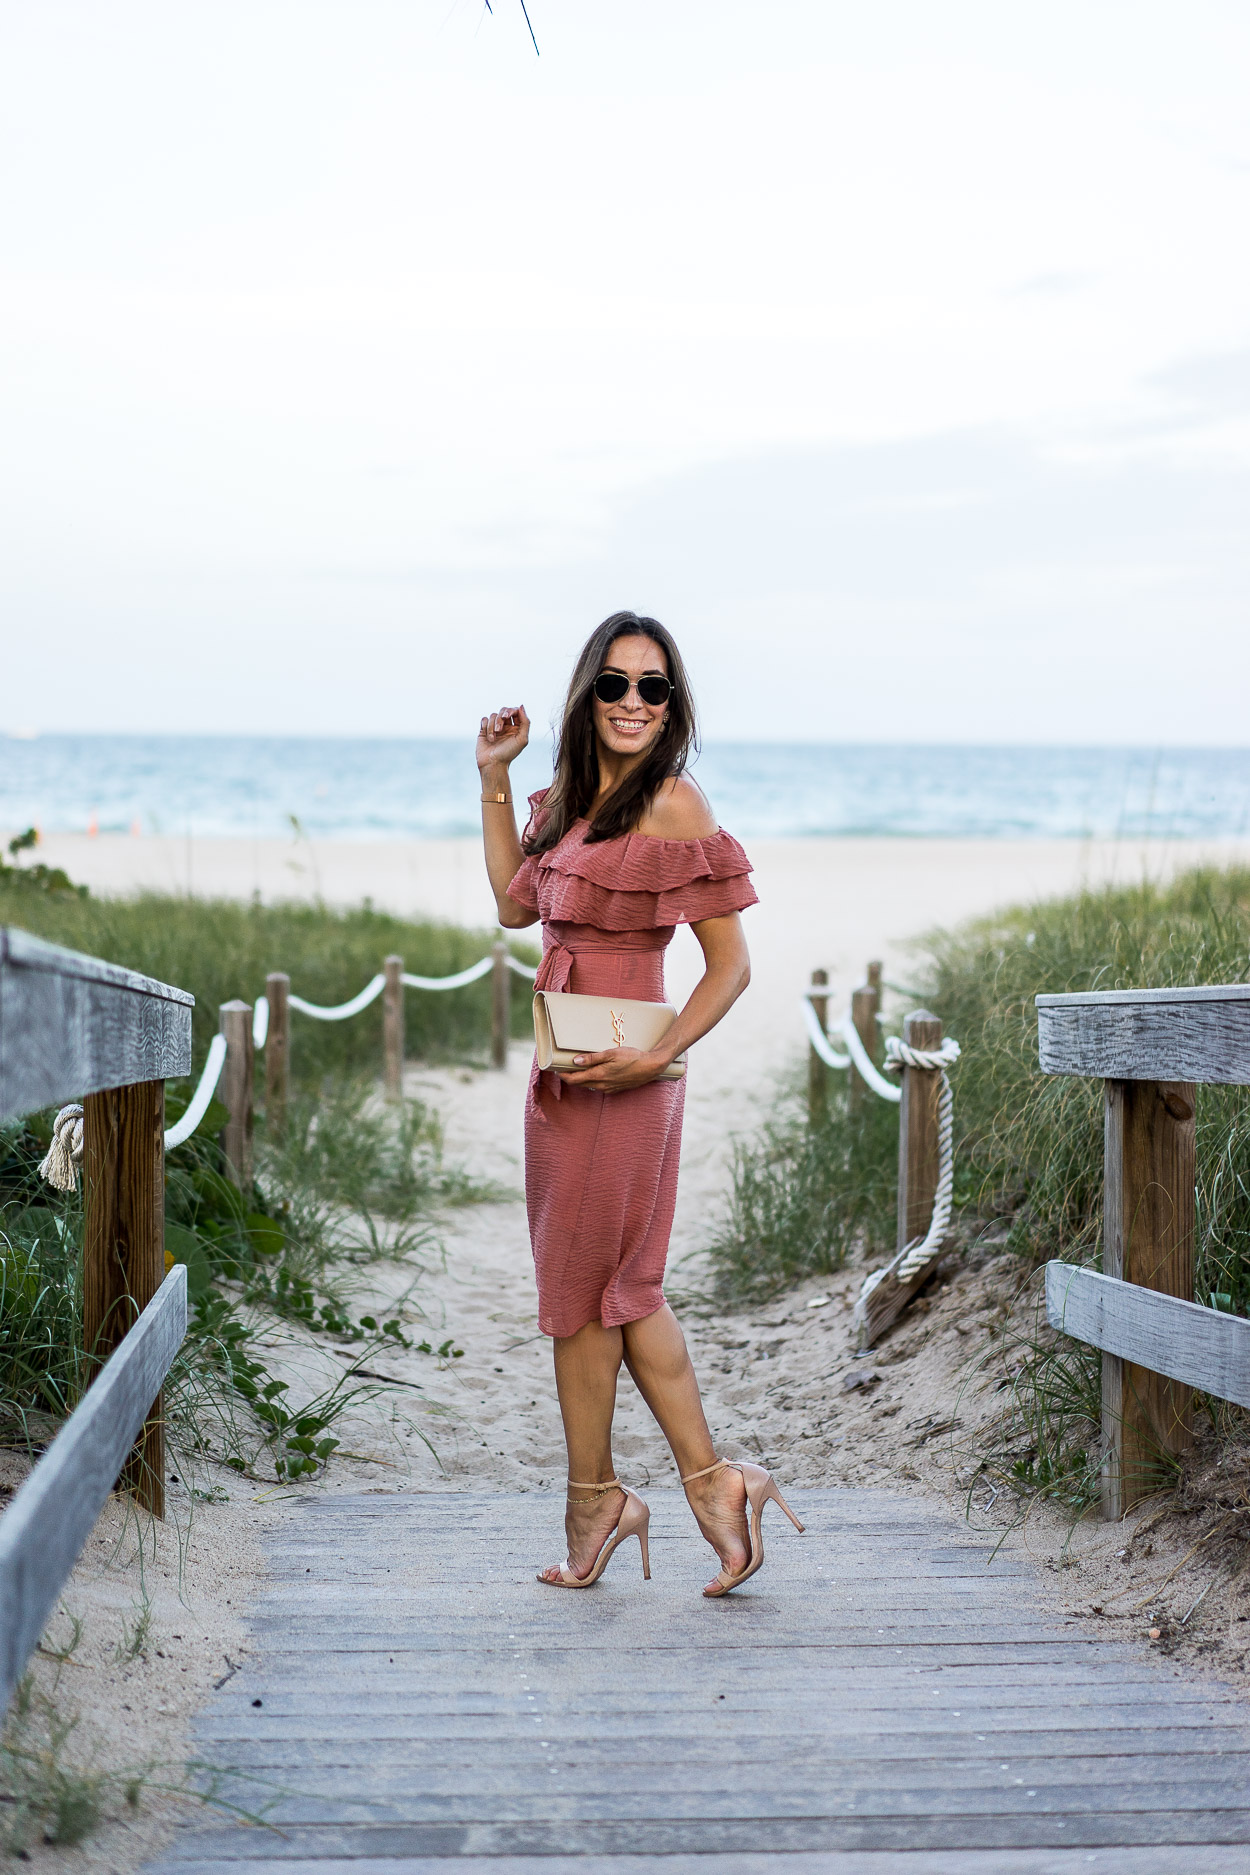 Accessorize your Summer style with pieces like a Chicwish dress, Warby Parker aviators and classic nude clutch like AGlamLifestyle blogger Amanda